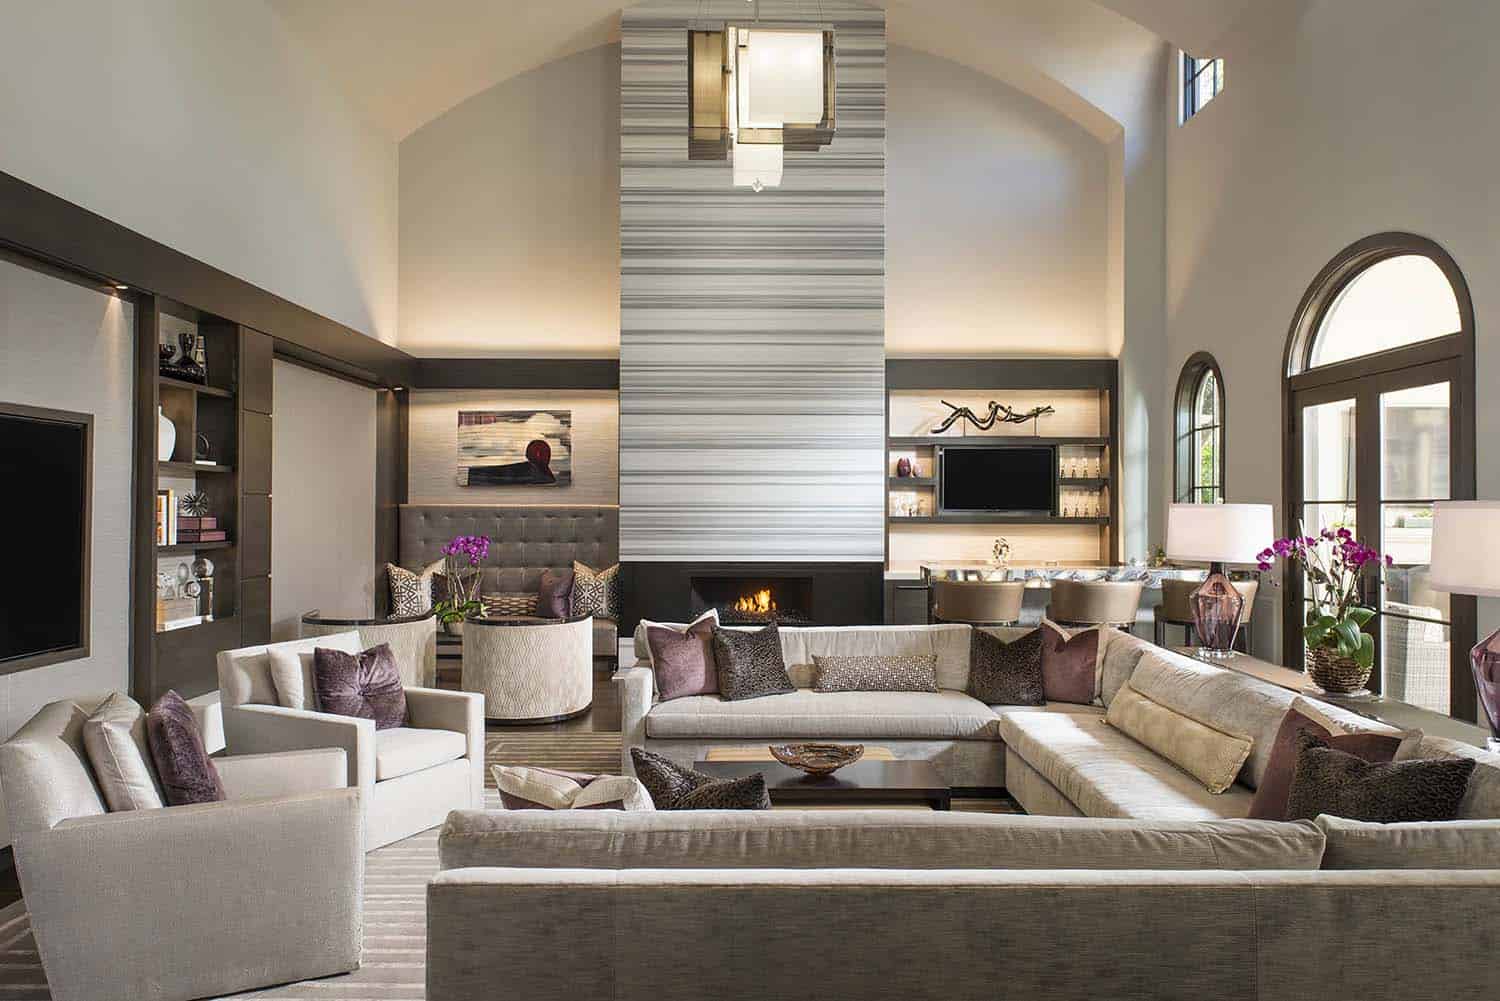 Luxurious modern home with striking entertaining spaces in Texas